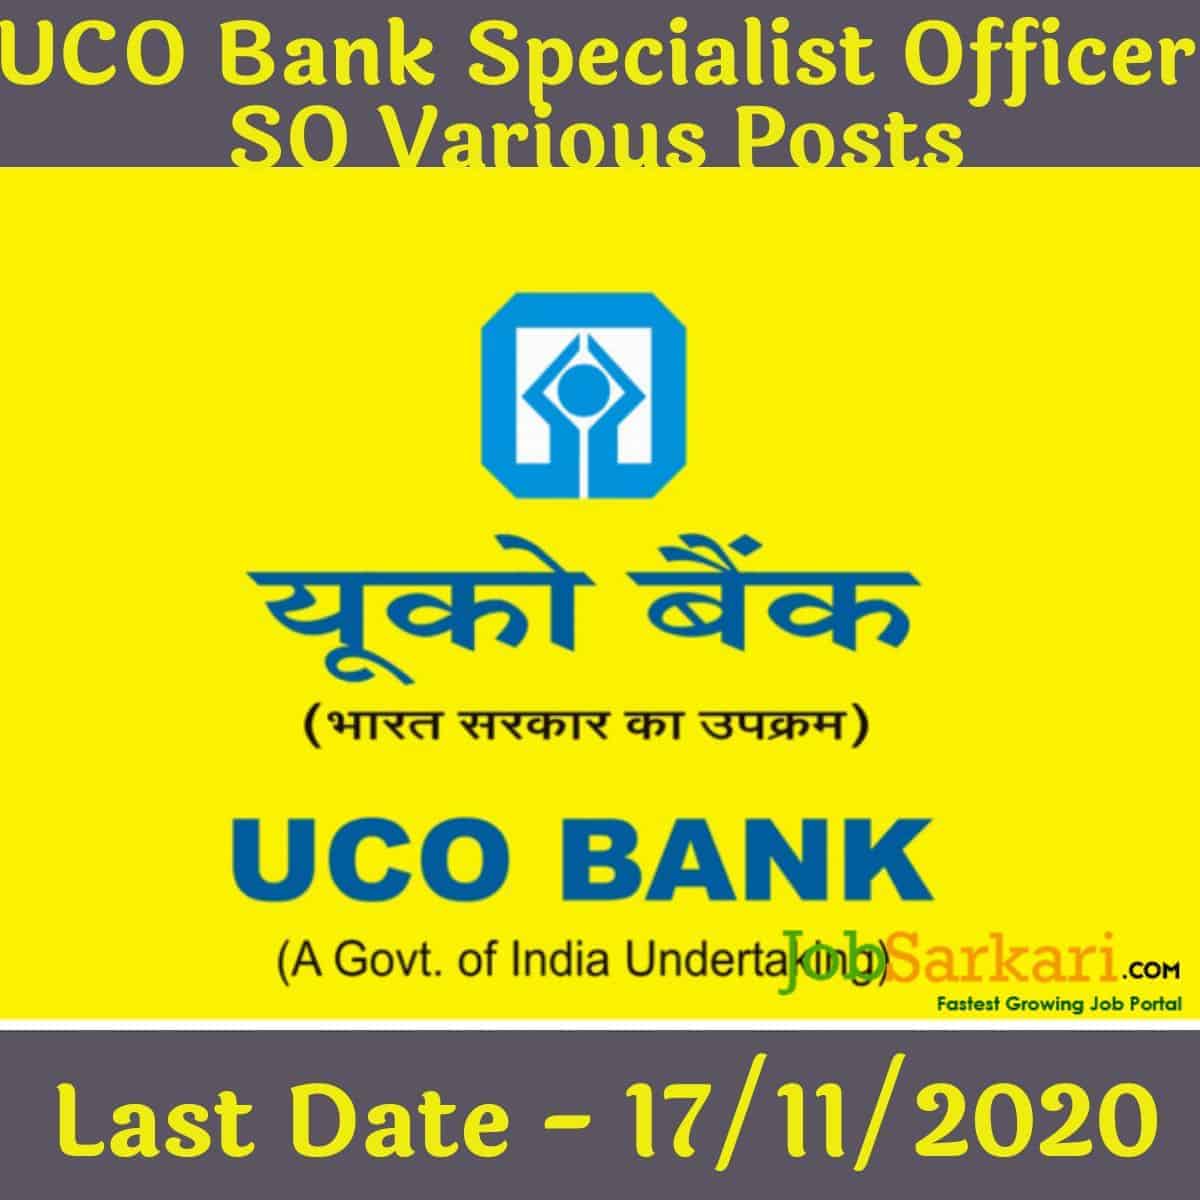 UCO Bank Specialist Officer SO Various Posts